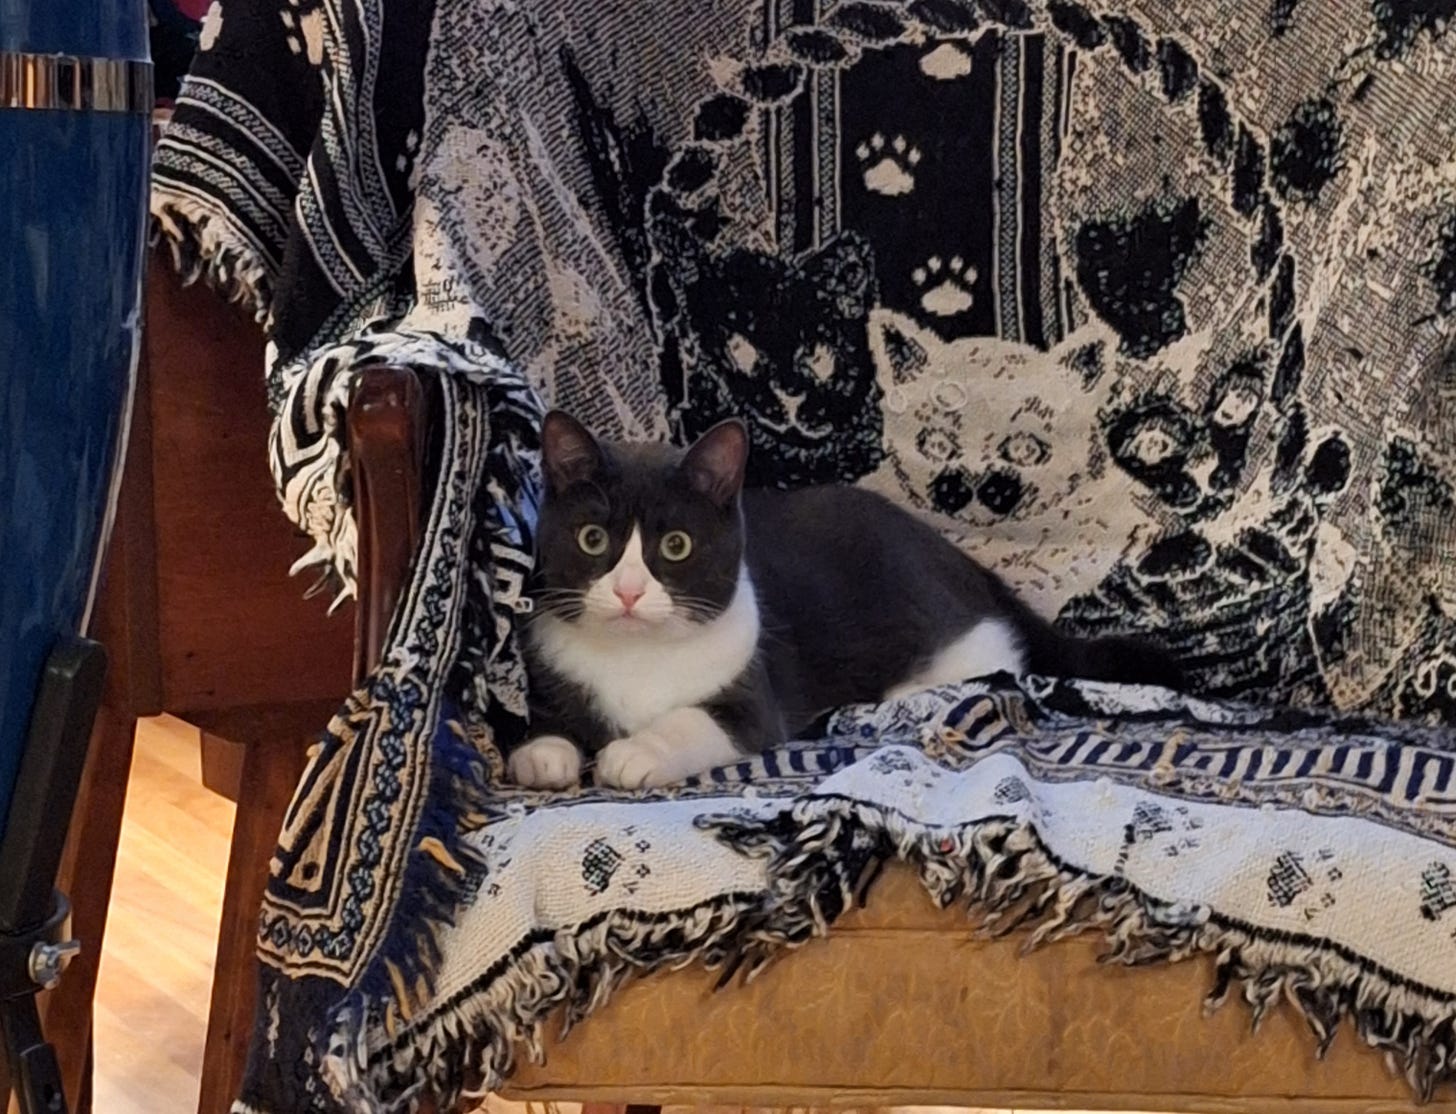 A picture of my cat on a chair with a blanket with cat images on it behind her